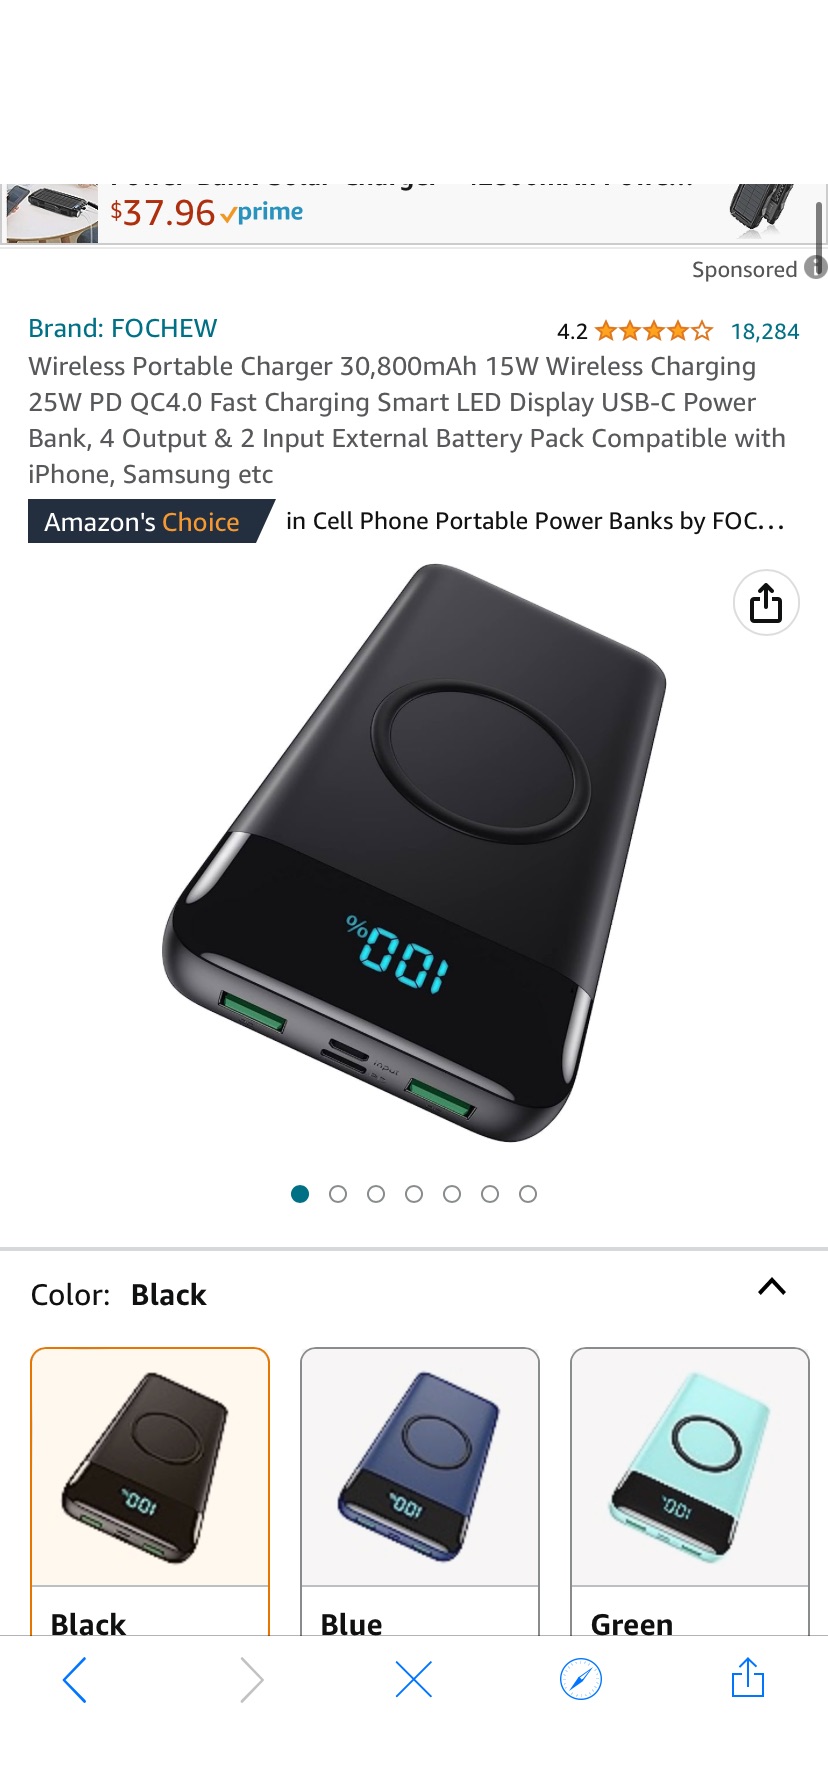 Amazon.com: Wireless Portable Charger 30,800mAh 15W Wireless Charging 25W PD QC4.0 Fast Charging Smart LED Display USB-C Power Bank, 4 Output & 2 Input External Battery Pack Compatible with iPhone, Sa